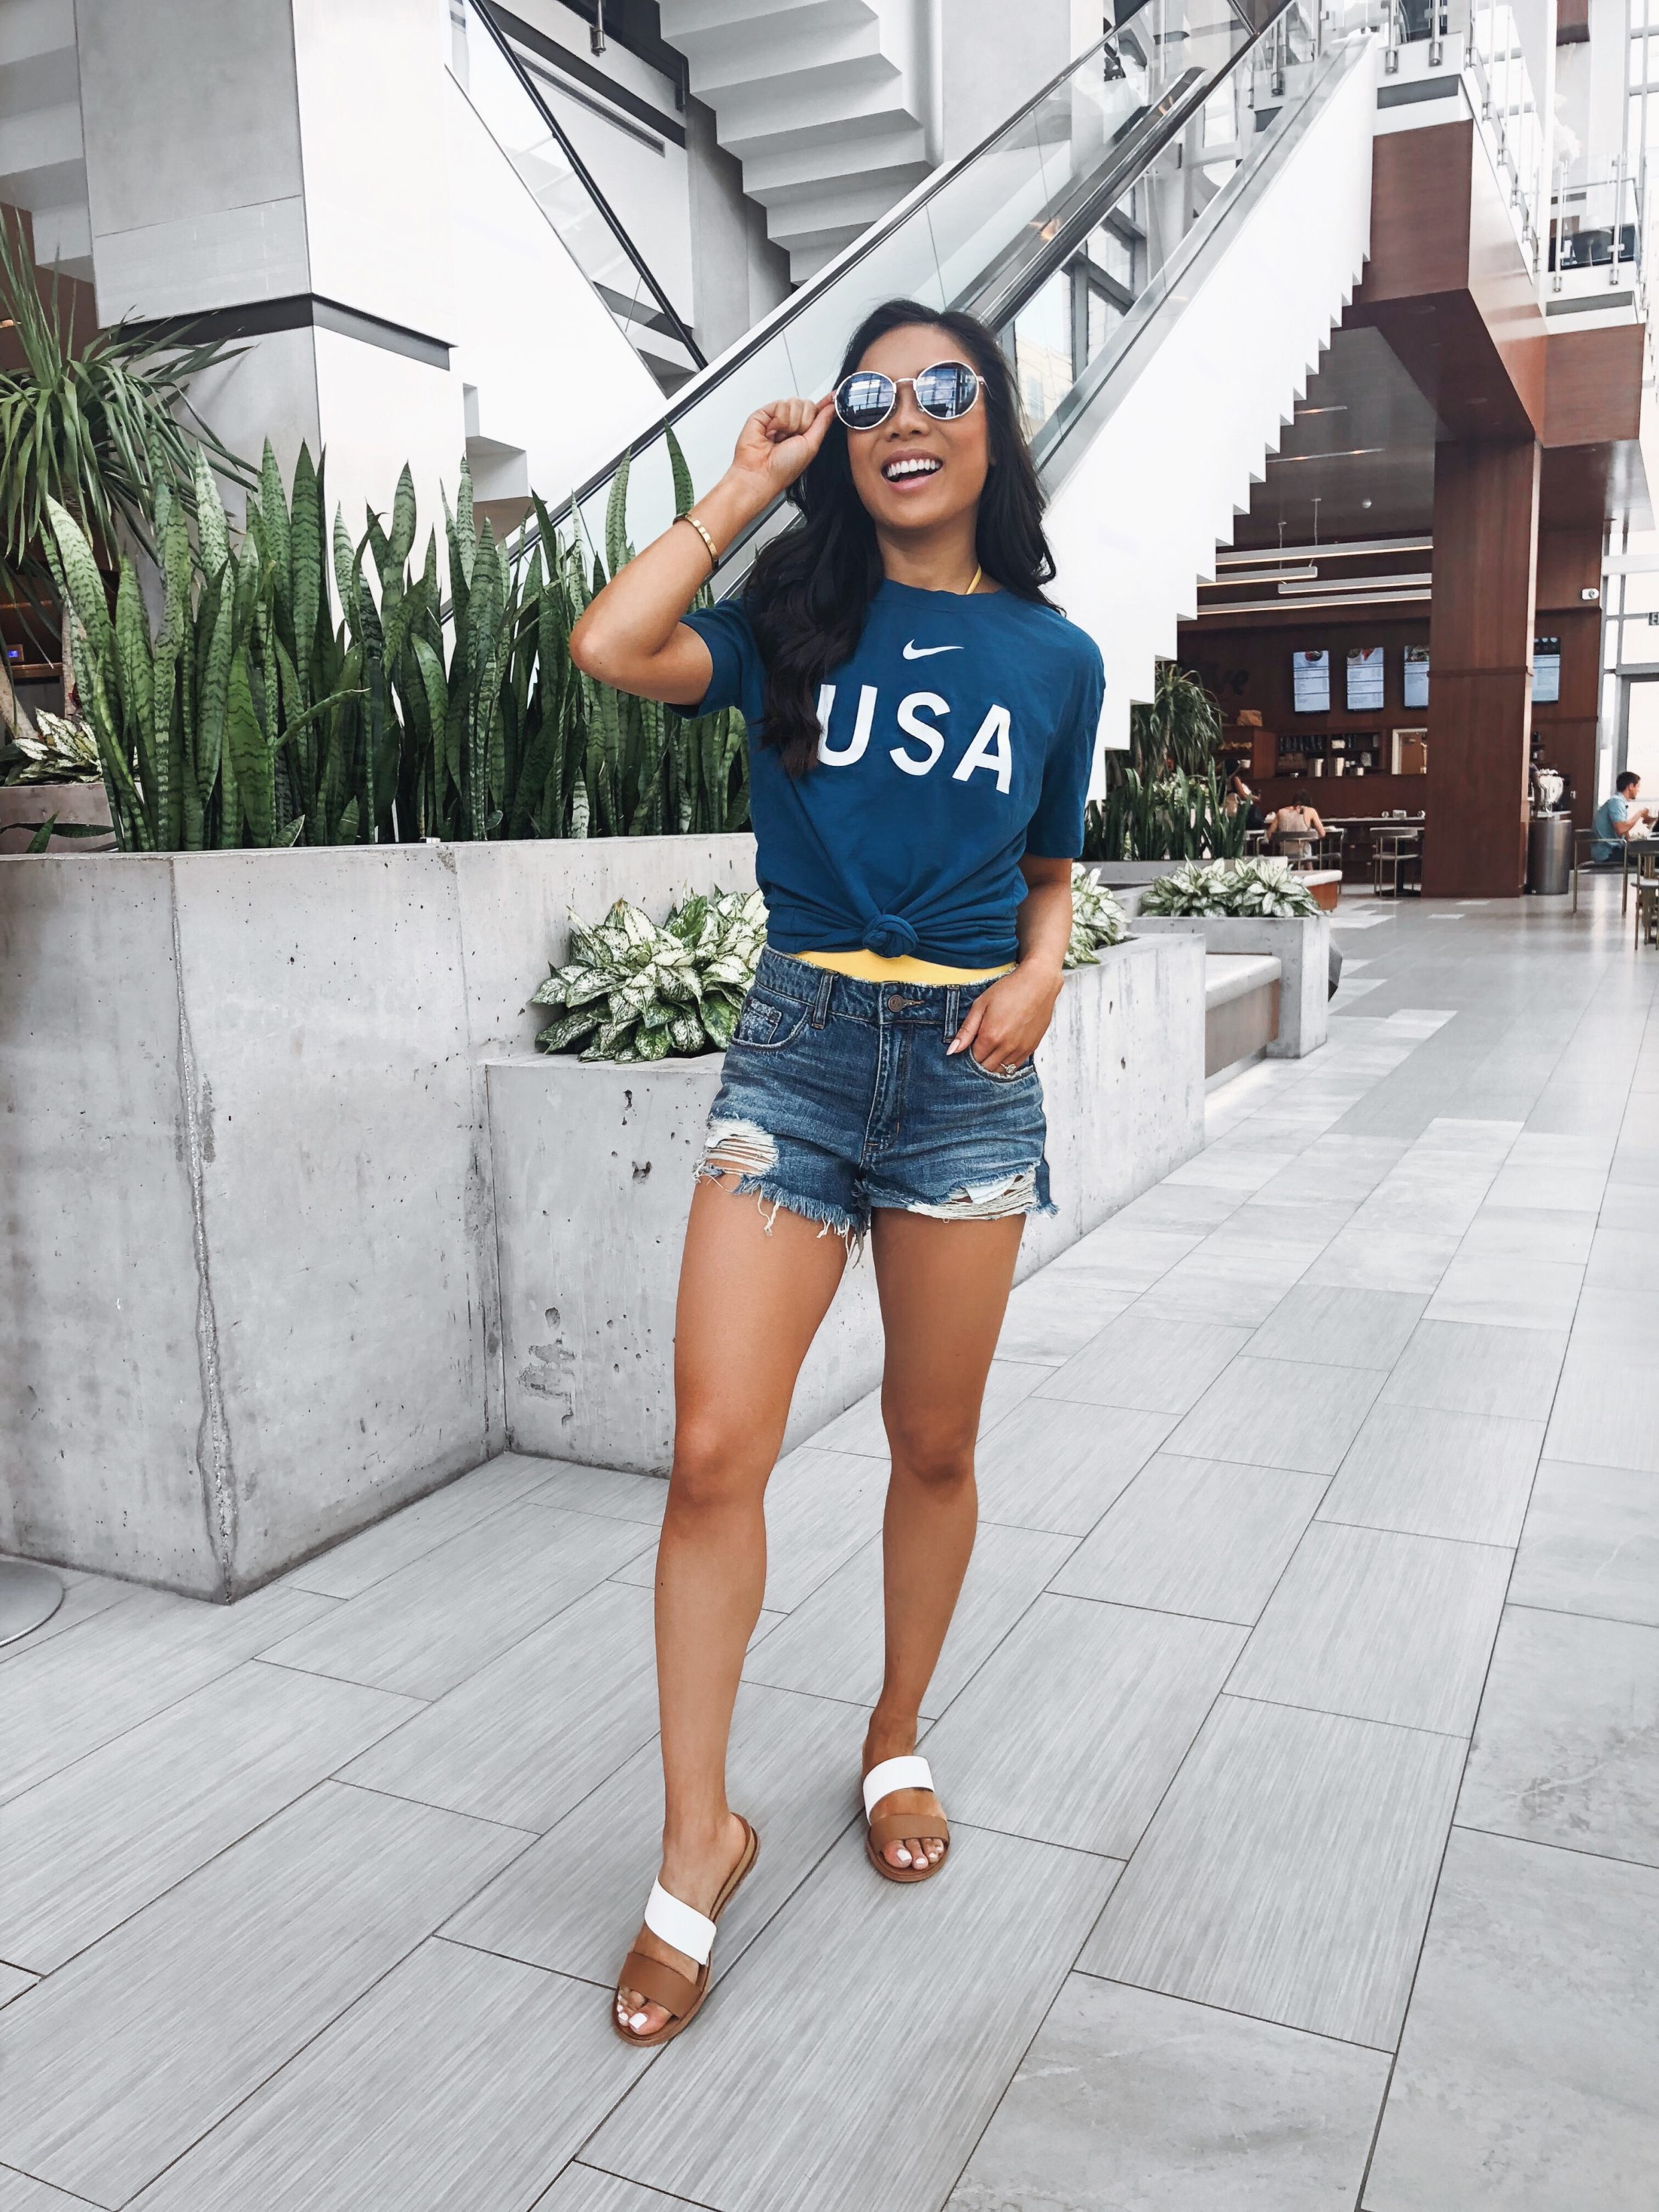 Nike Team USA t-shirt, distressed shorts and dolce vita sandals